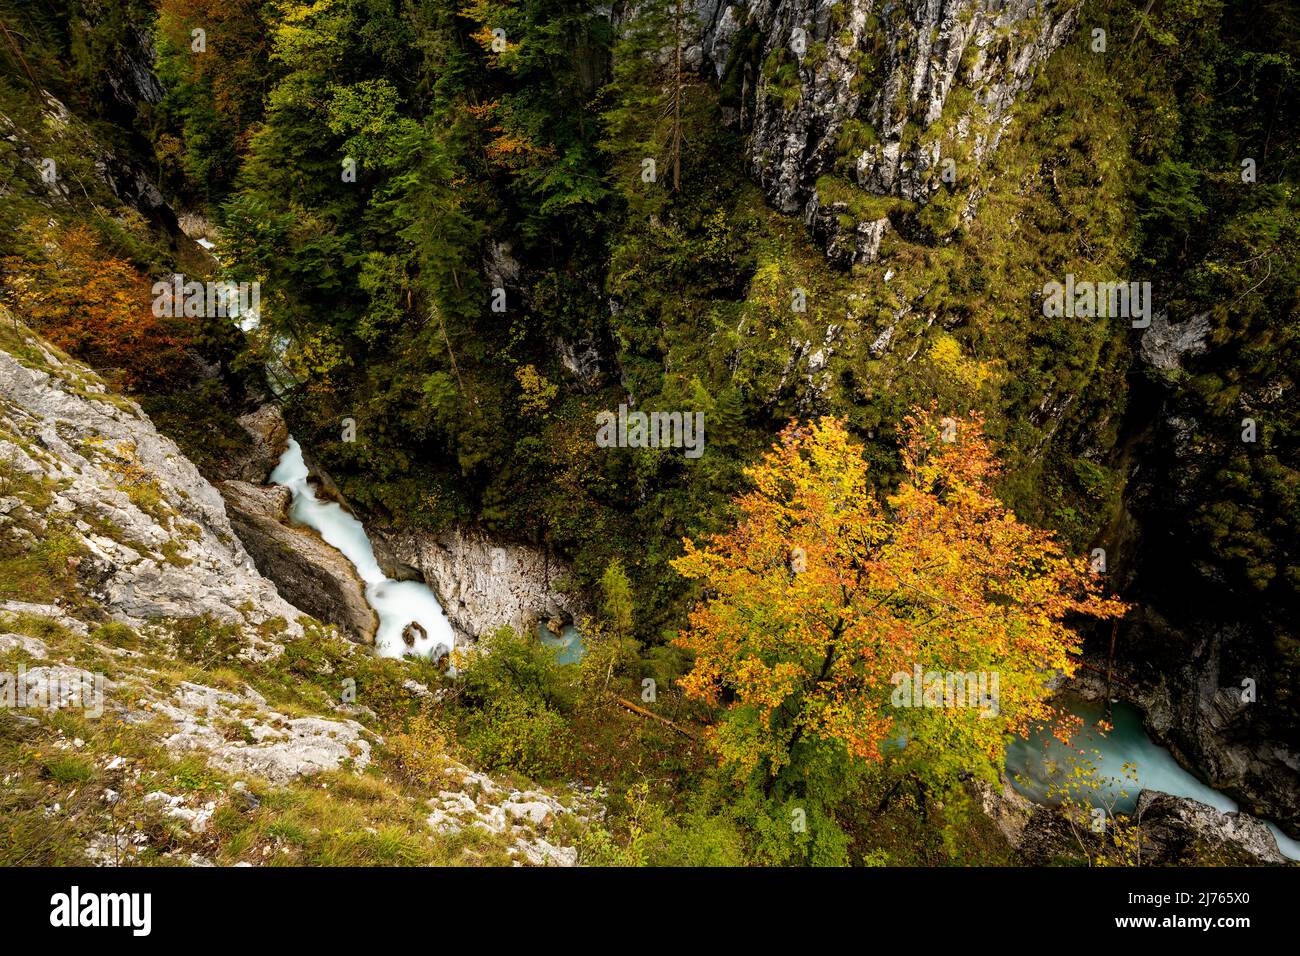 View from above of the Leutascher or Mittenwalder Geisterklamm in the border area between Germany and Austria in autumn. A colorful beech tree stands against the high rock walls. Stock Photo